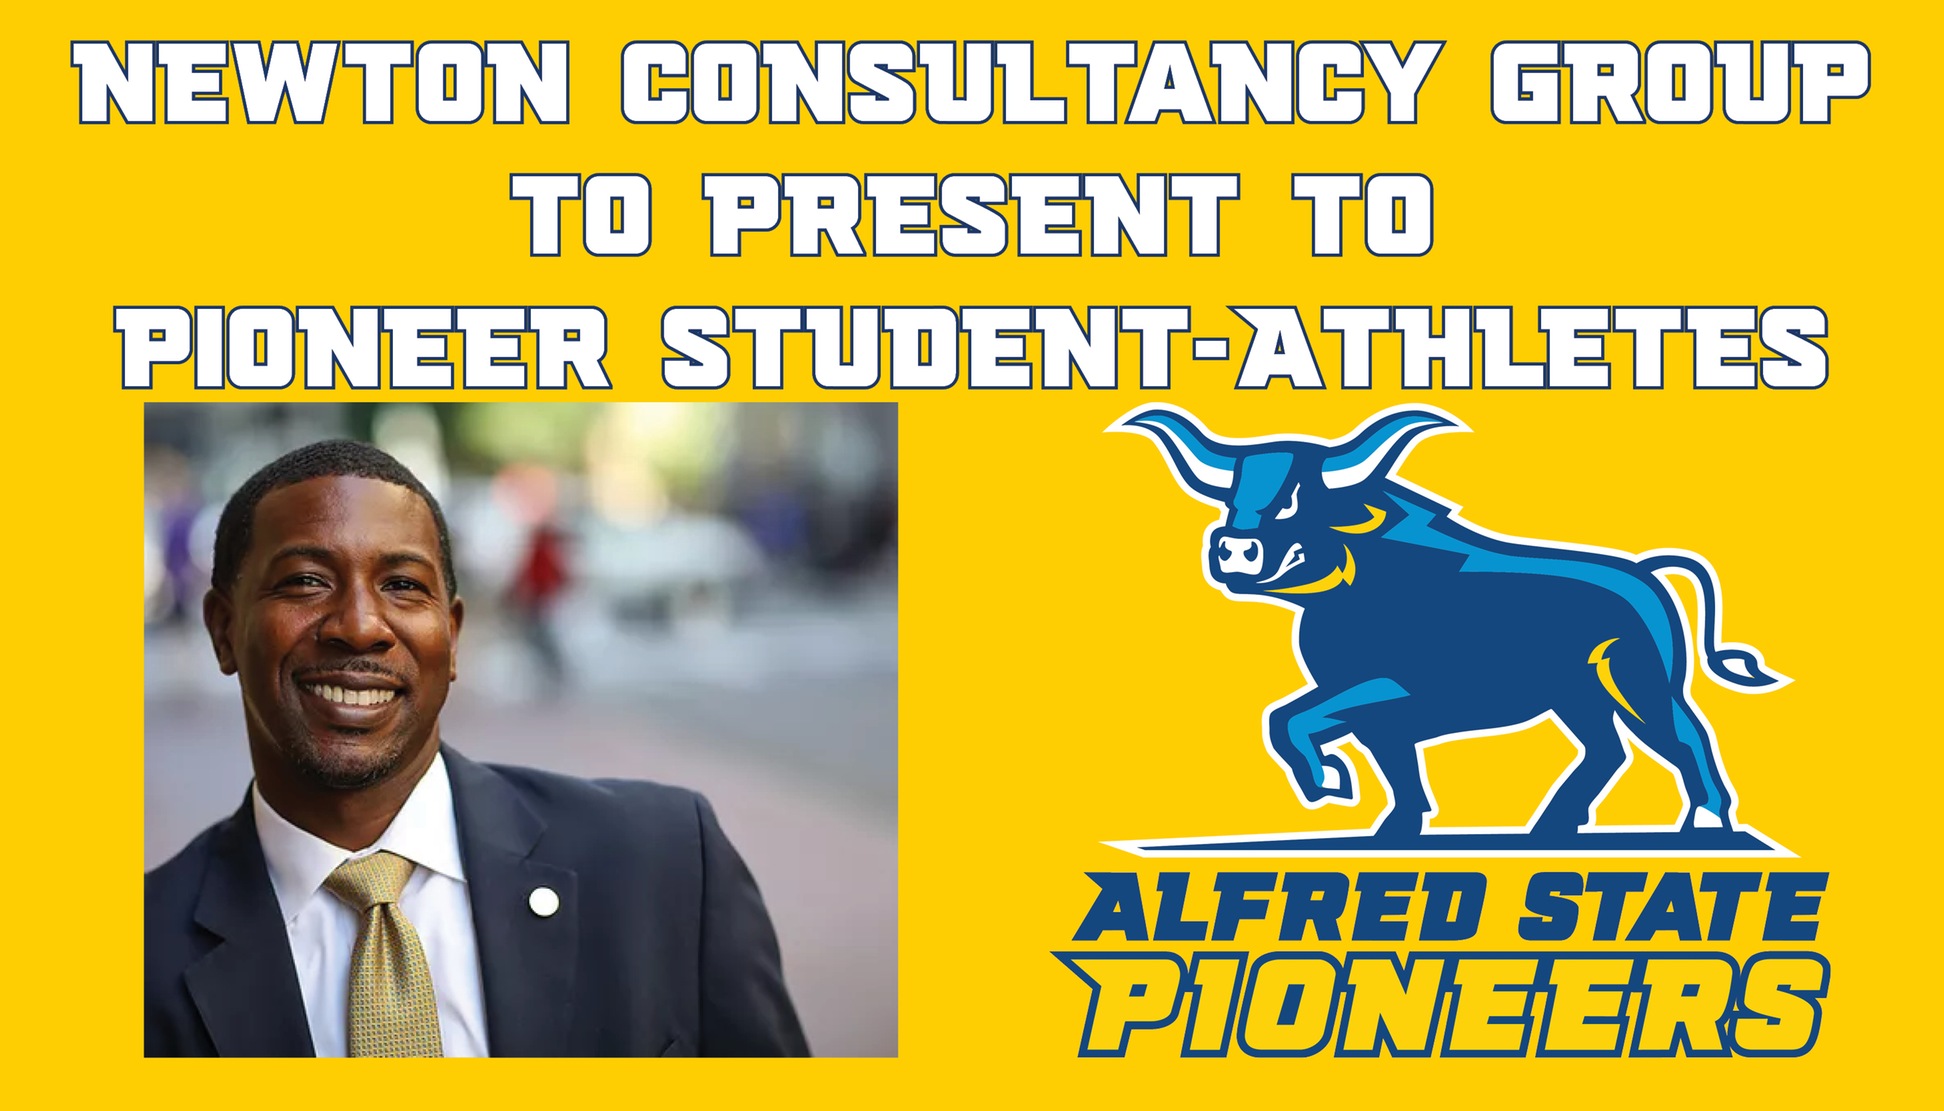 Shawn Newton from the Newton Consultancy Group is going to present a program entitled Racism: Breaking it Down and Breaking it Apart to Alfred State student-athletes. 

Shawn Newton is pictured in the graphic.